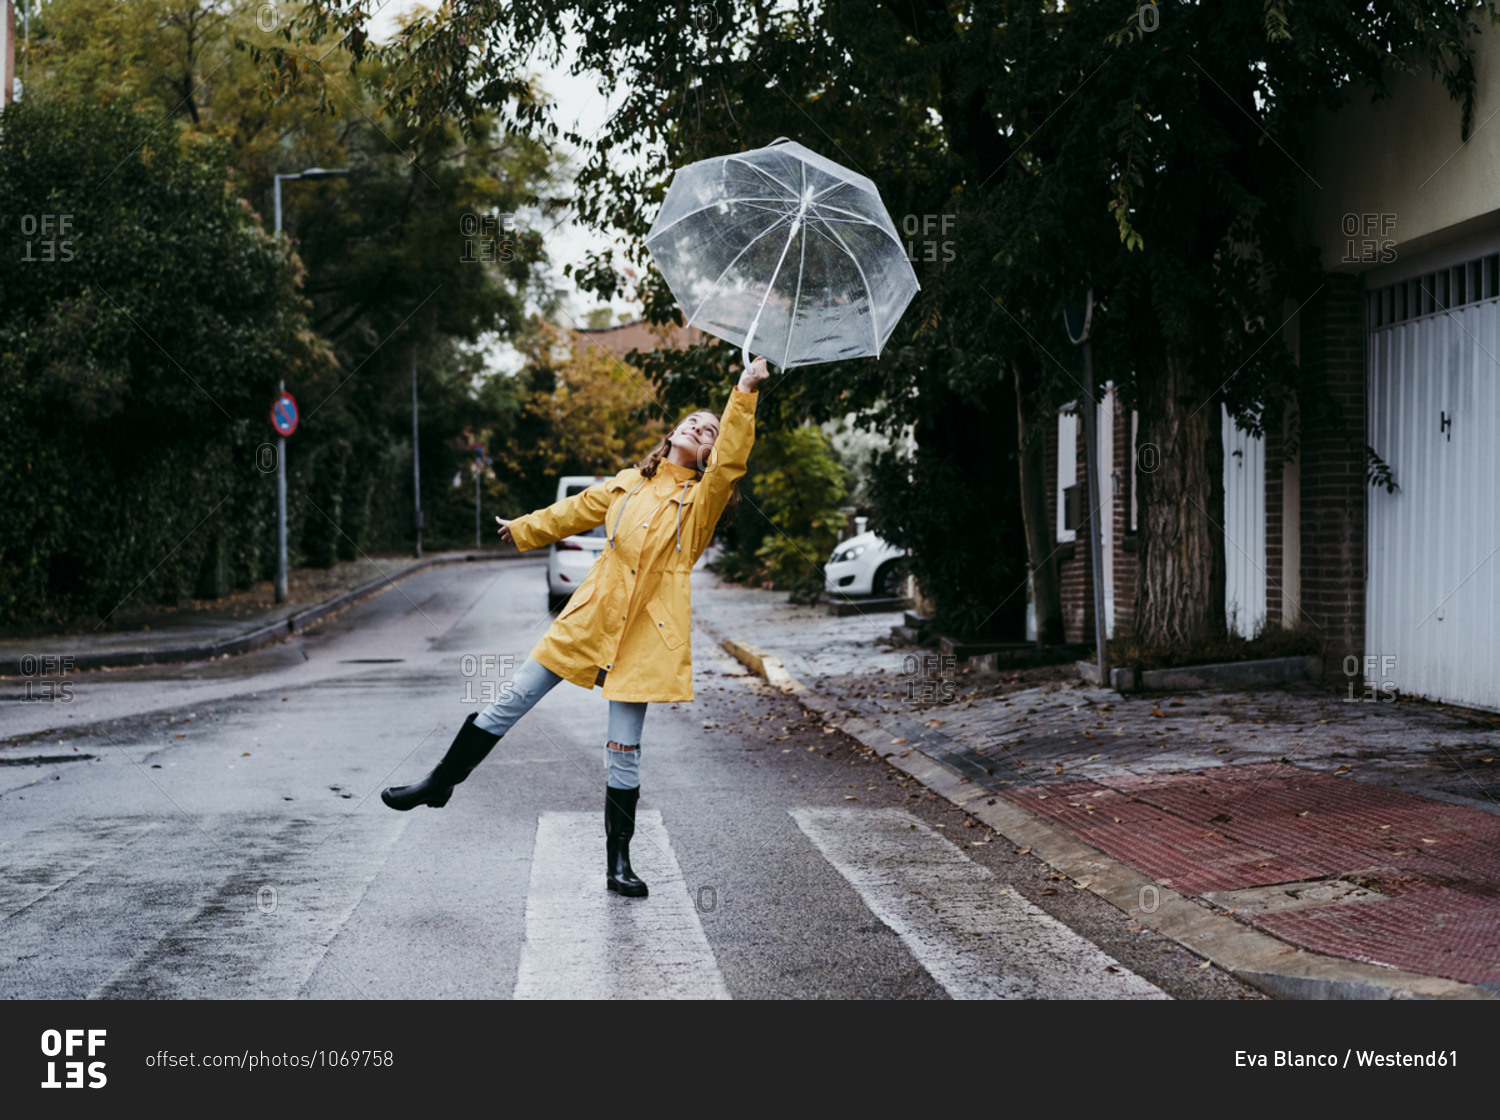 Girl wearing raincoat dancing with umbrella while standing on road in city